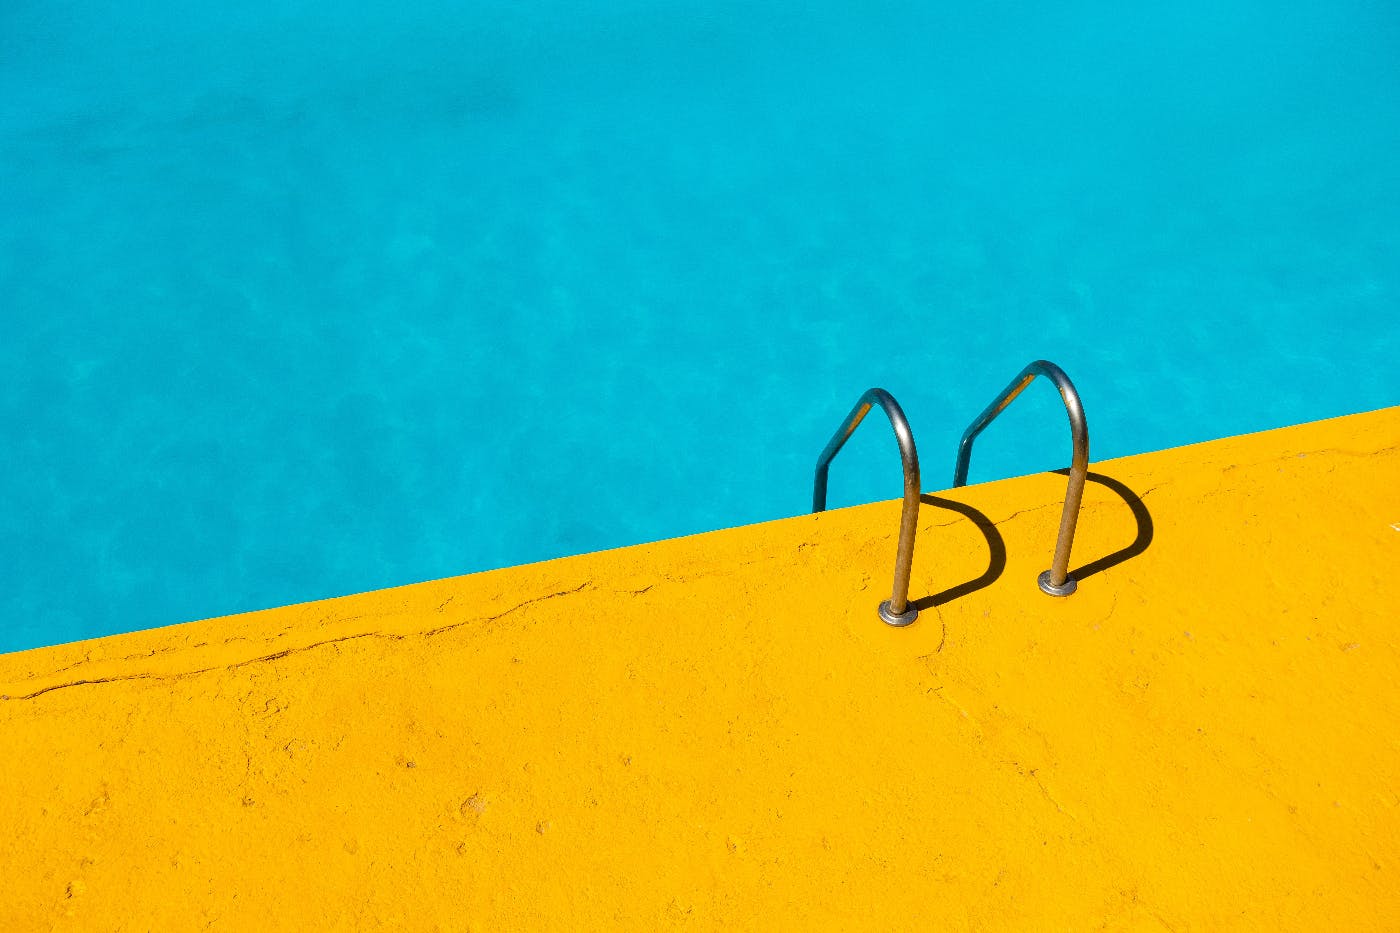 Blue water of a swimming pool, the yellow ocra deck and the handles of a stainless steel ladder